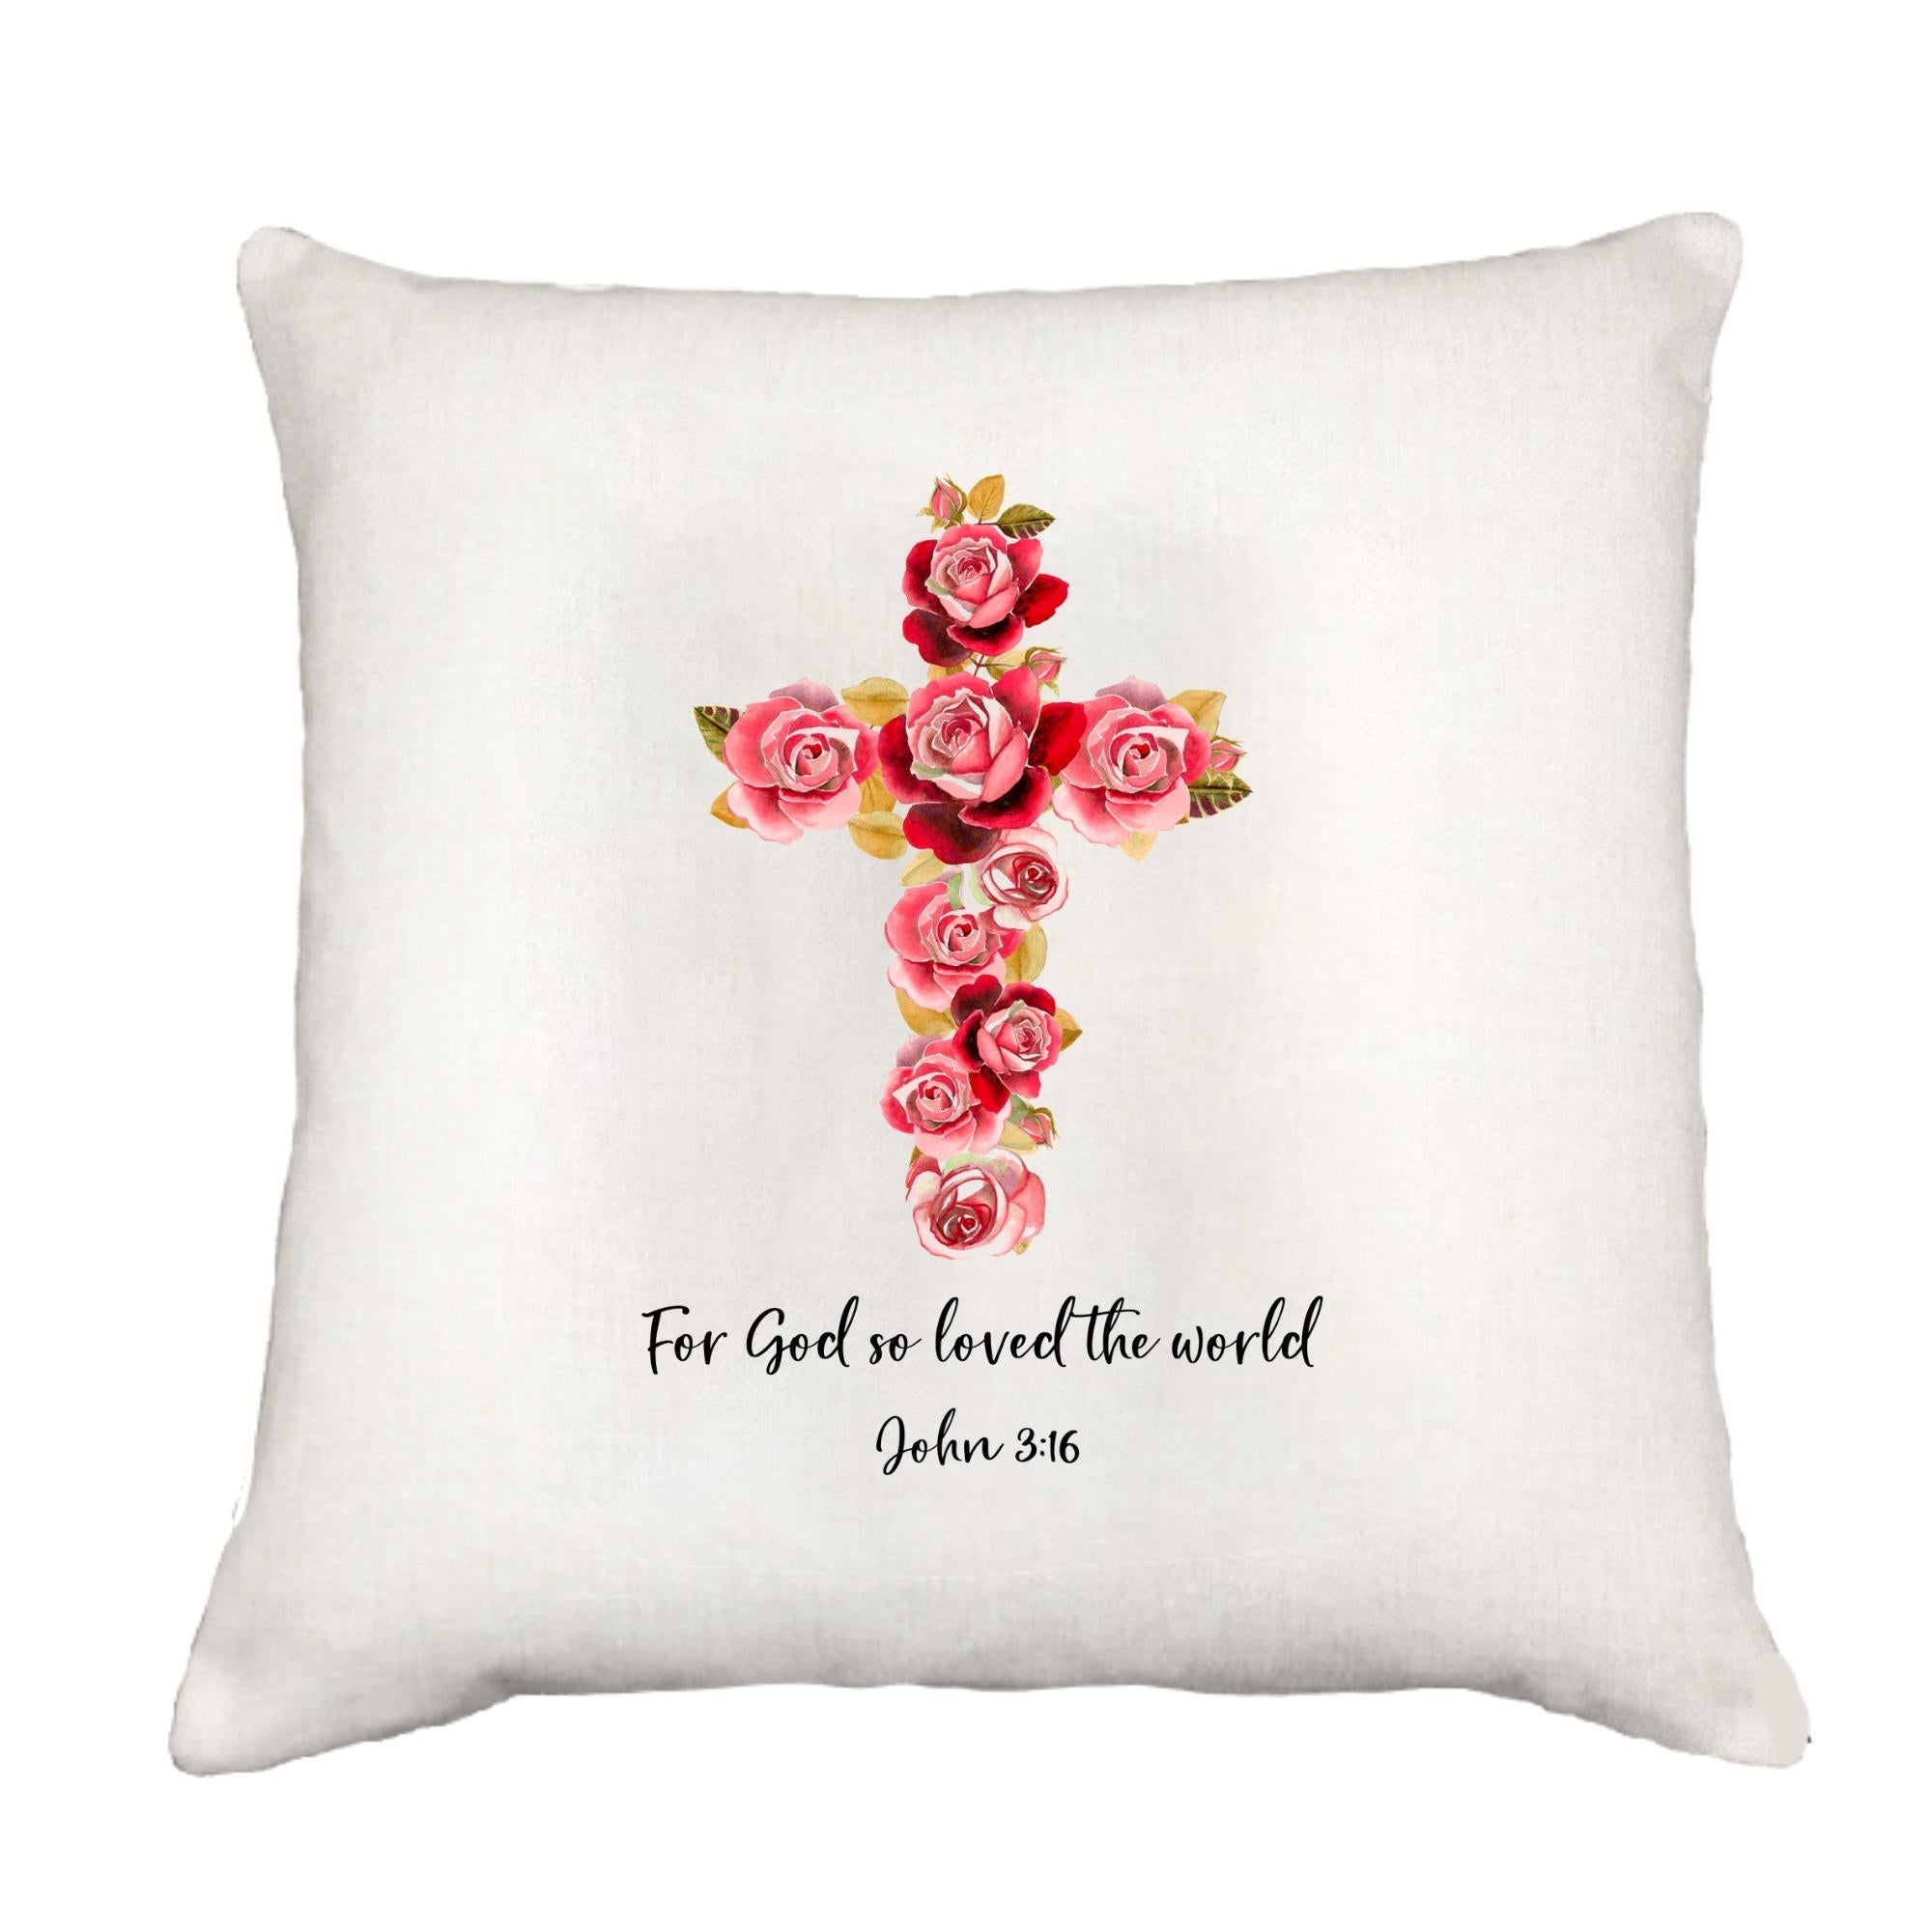 Floral Cross Cottage Pillow Throw/Decorative Pillow - Southern Sisters